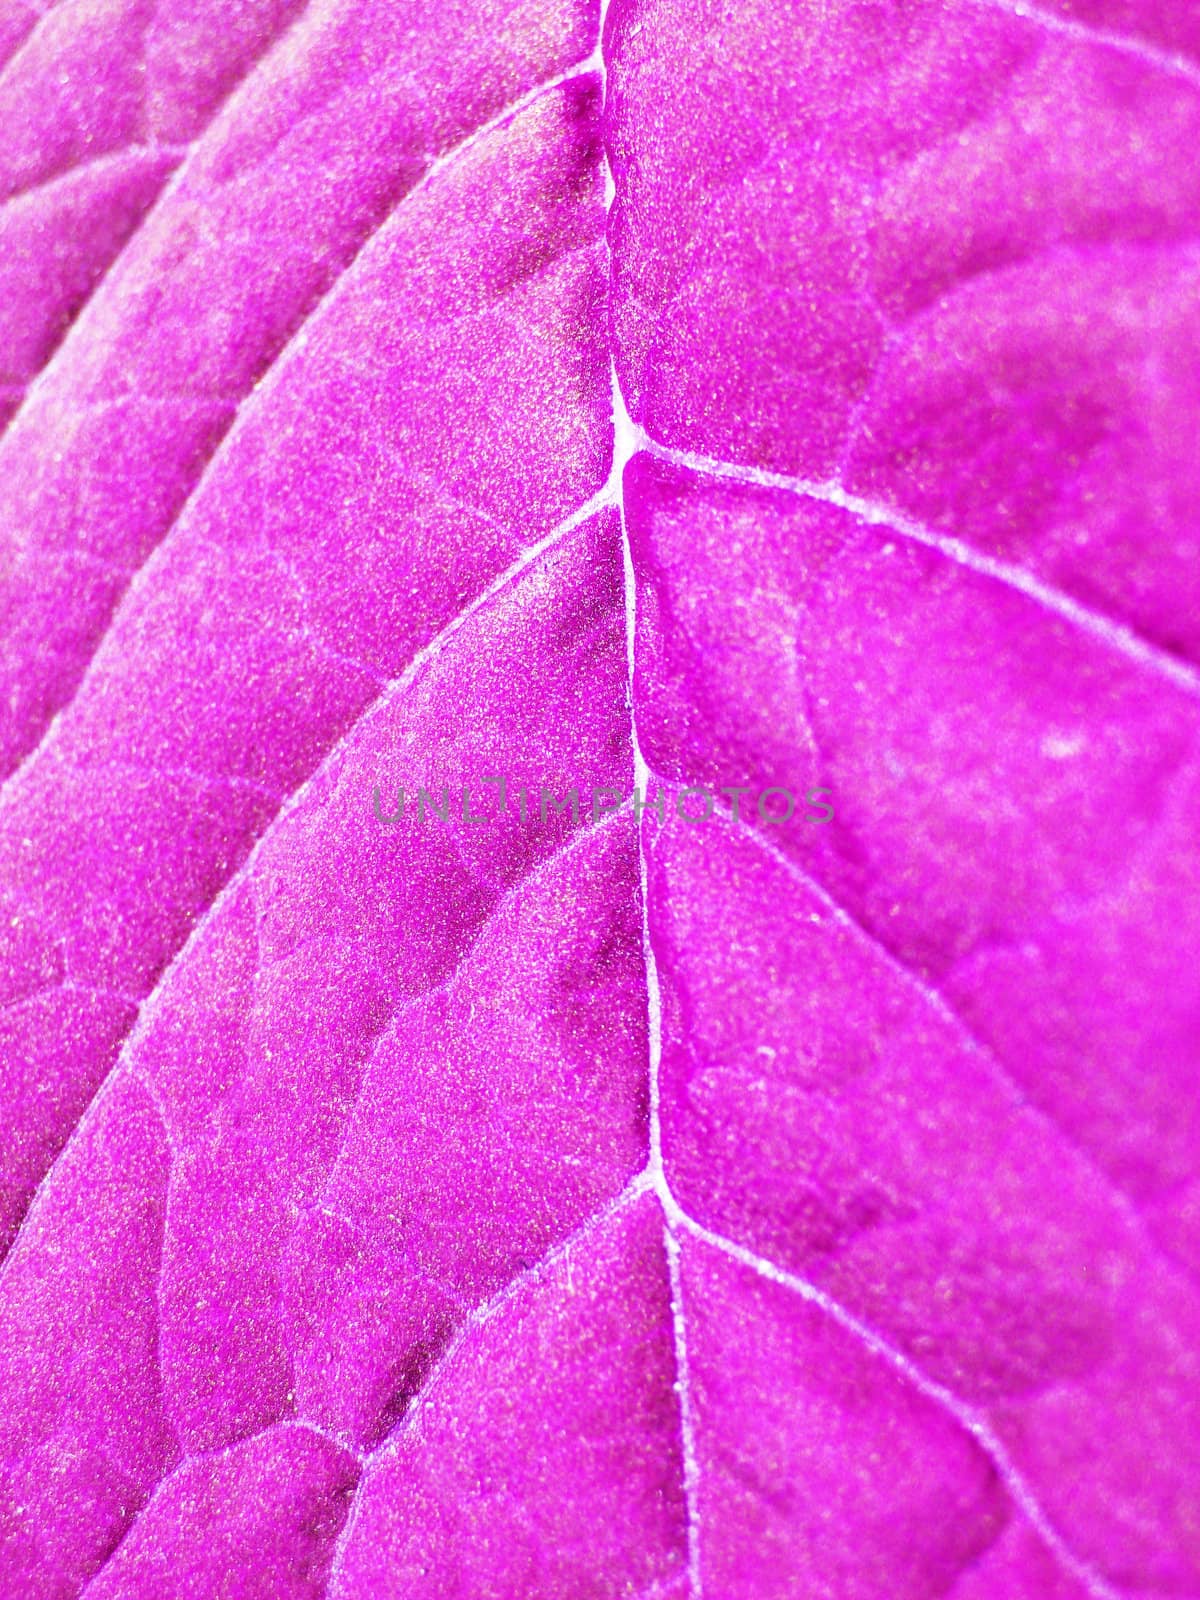 Very unusual background of unusual colored leaf